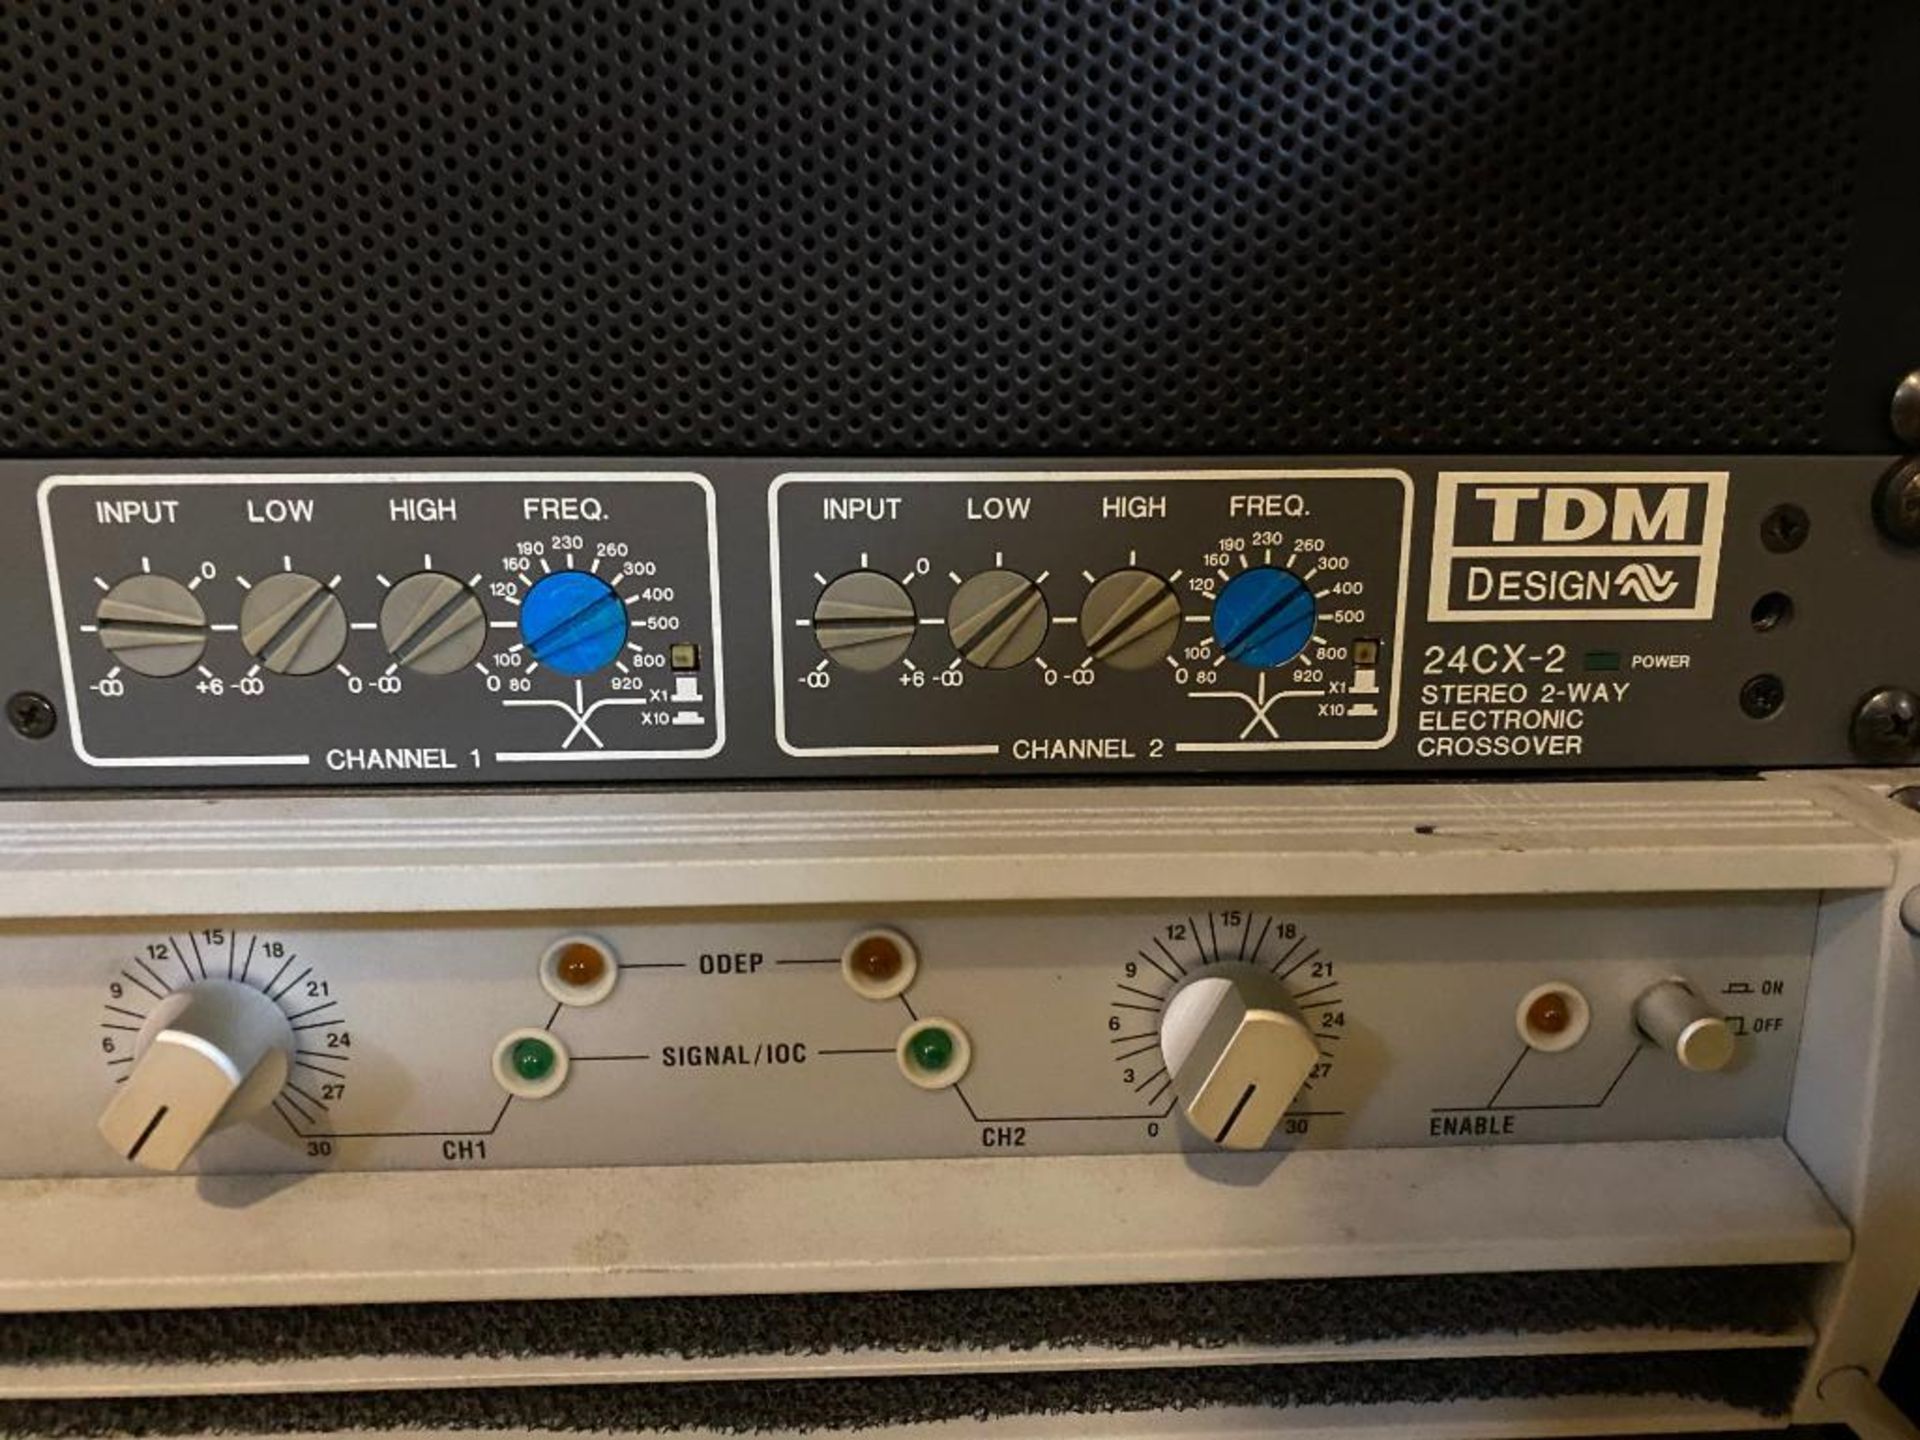 DESCRIPTION CROSSOVER & MACRO-TECH POWER AMPLIFIER WITH ROAD CASE ON CASTERS BRAND/MODEL TDM 24CX-2, - Image 2 of 5